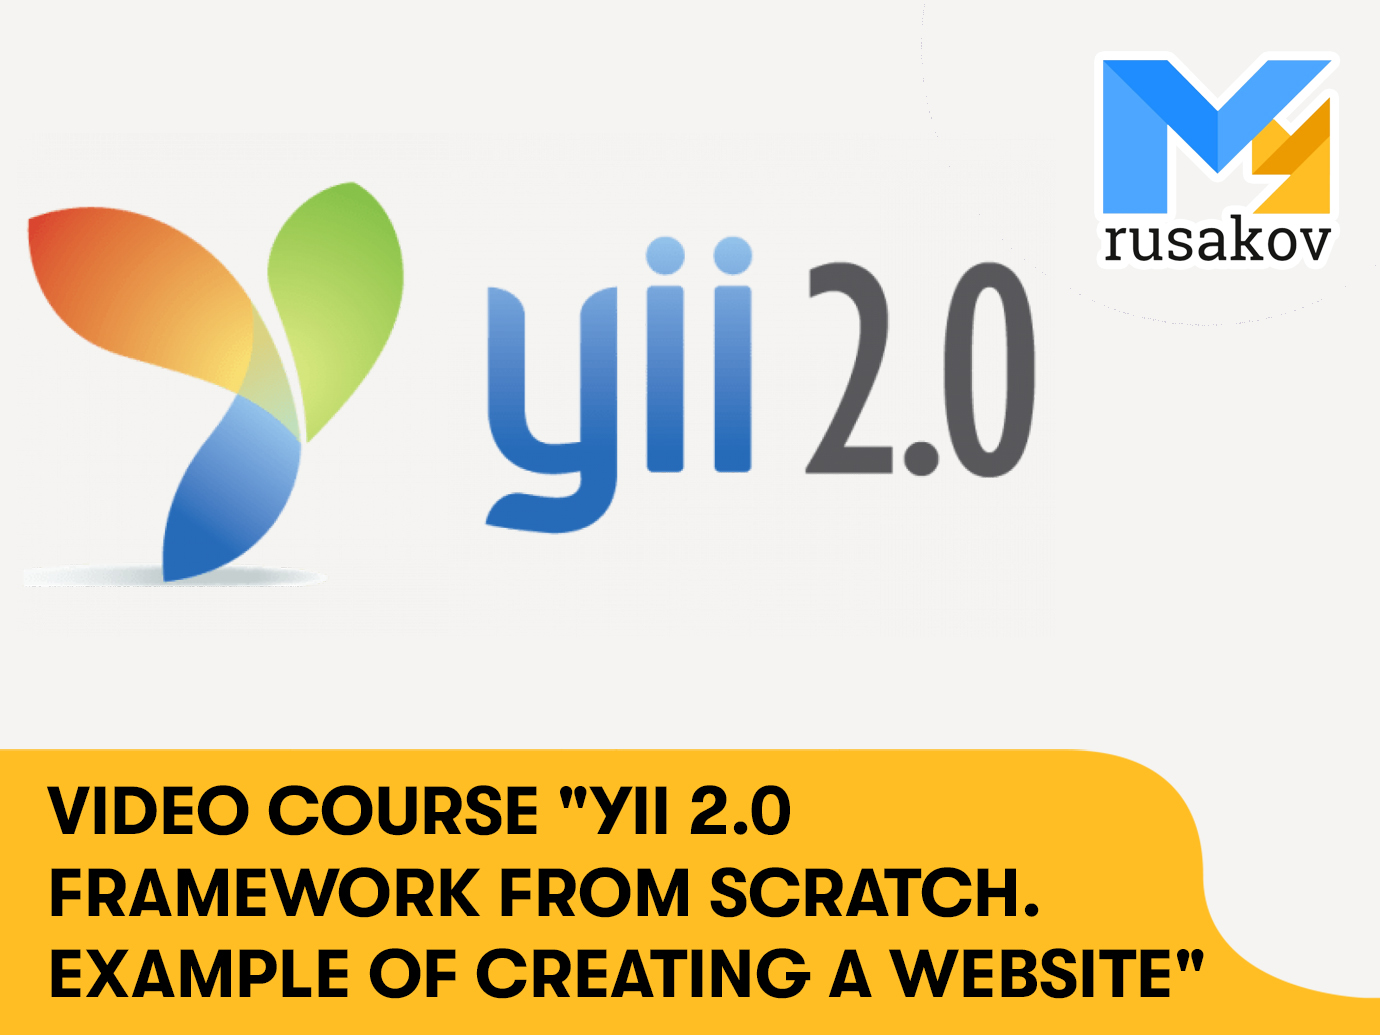 Video course “Yii 2.0 framework from scratch. Example of creating a website“